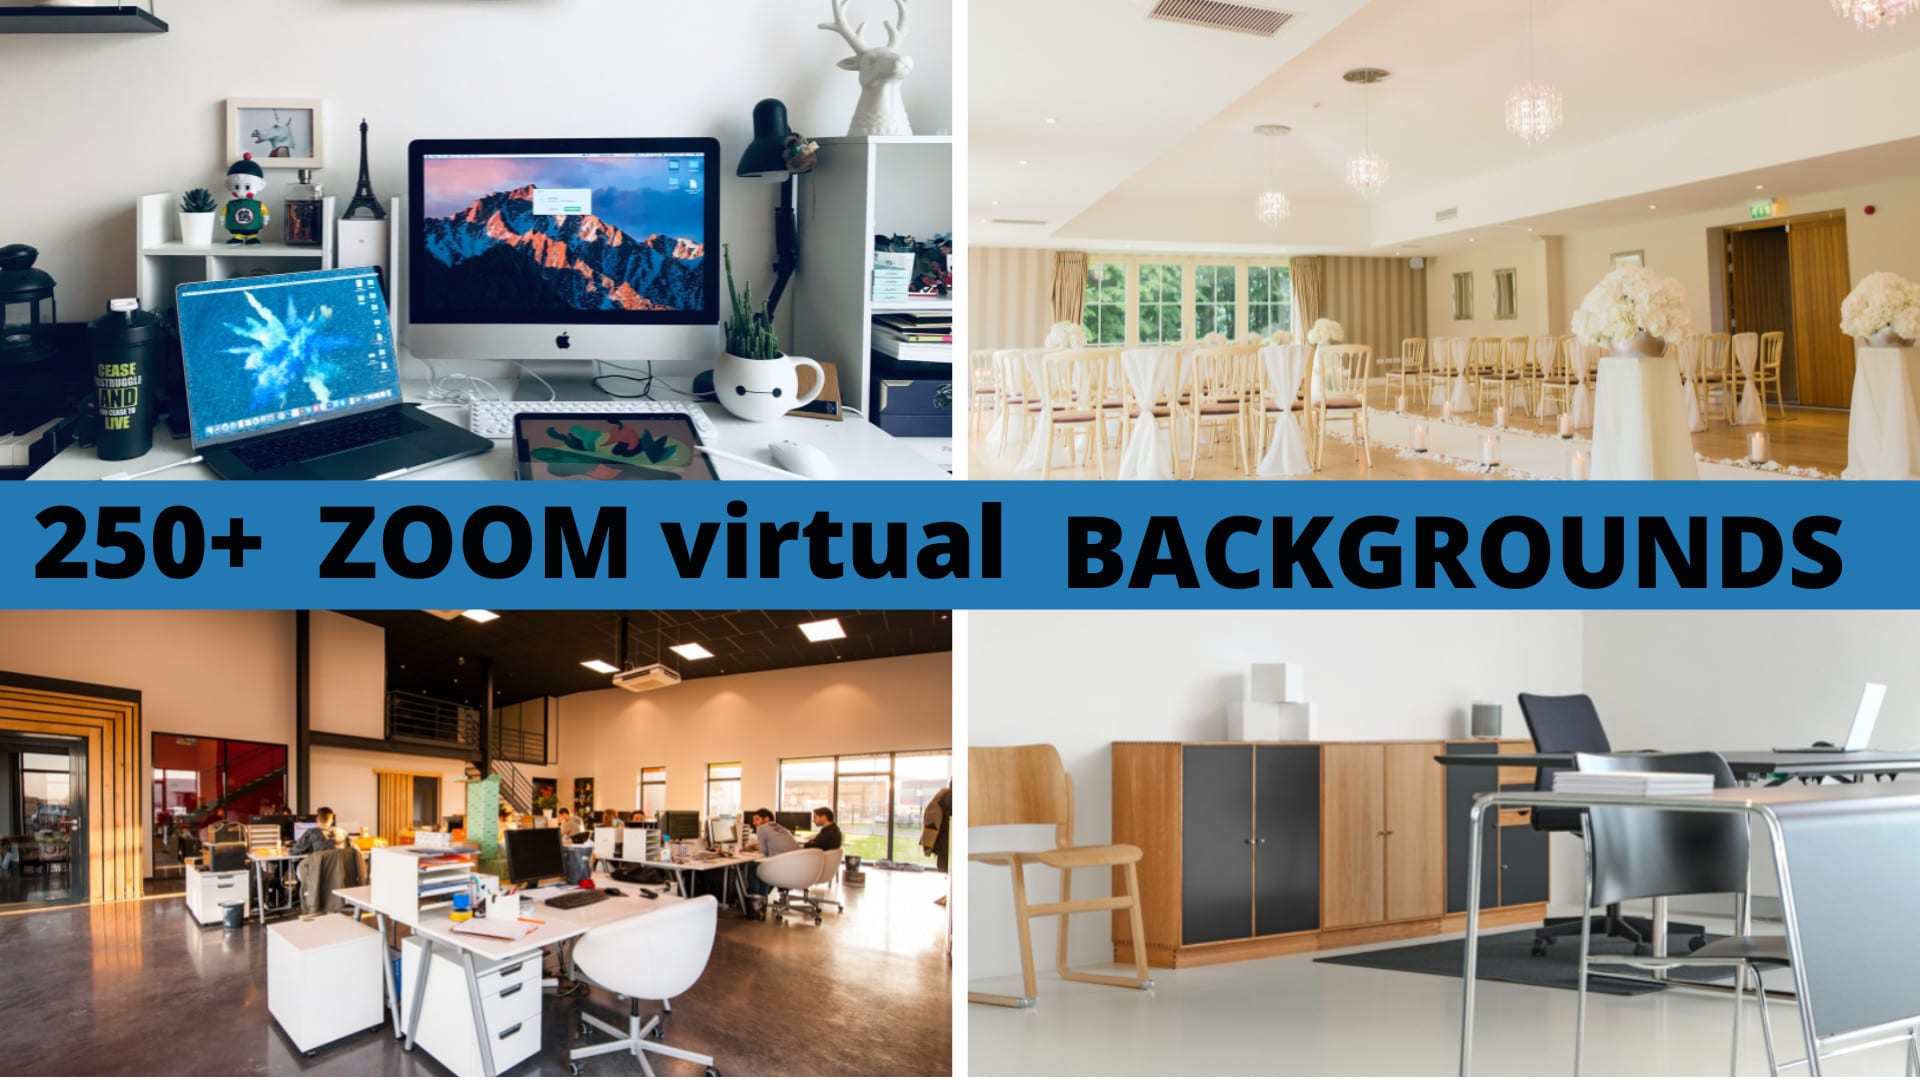 Design hd google meet and zoom virtual background by Mdarifhossai681 |  Fiverr